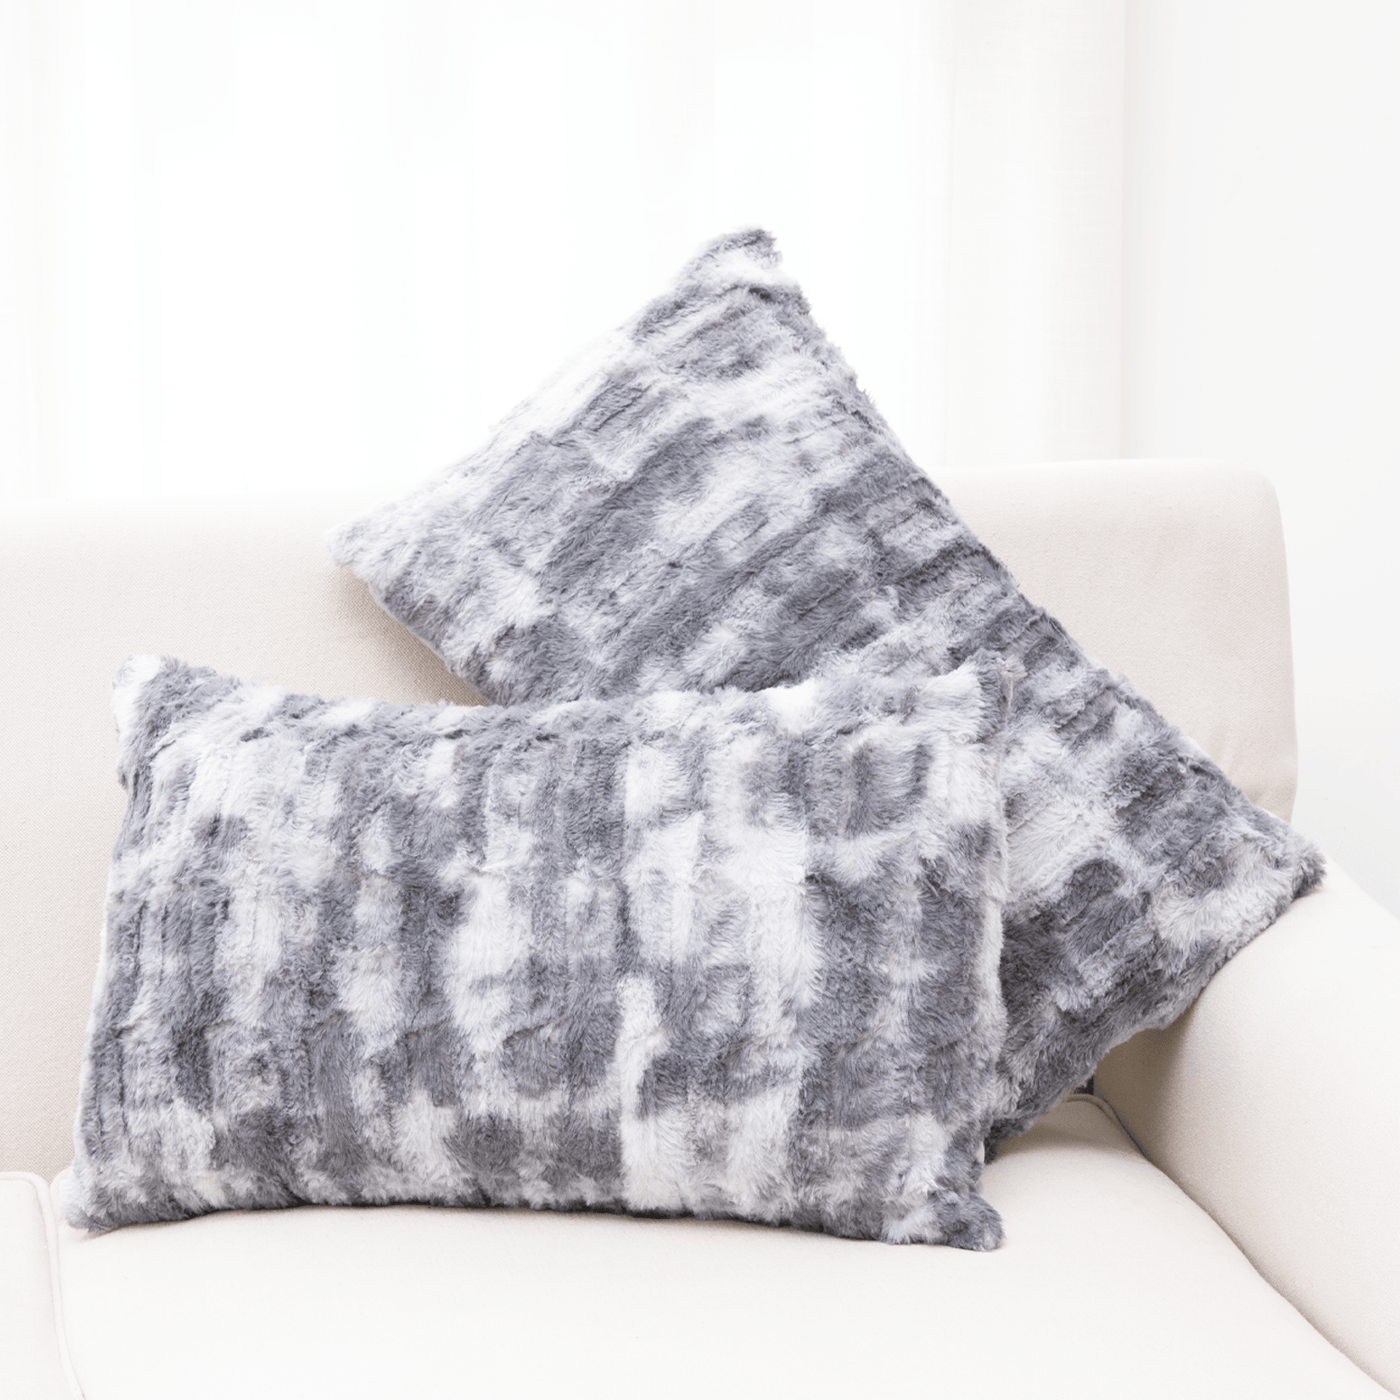 Cheer Collection Faux Fur Pillows - Decorative Throw Pillows for Couch &  Bed - Machine Washable - 20 x 20 - Black (Set of 2)